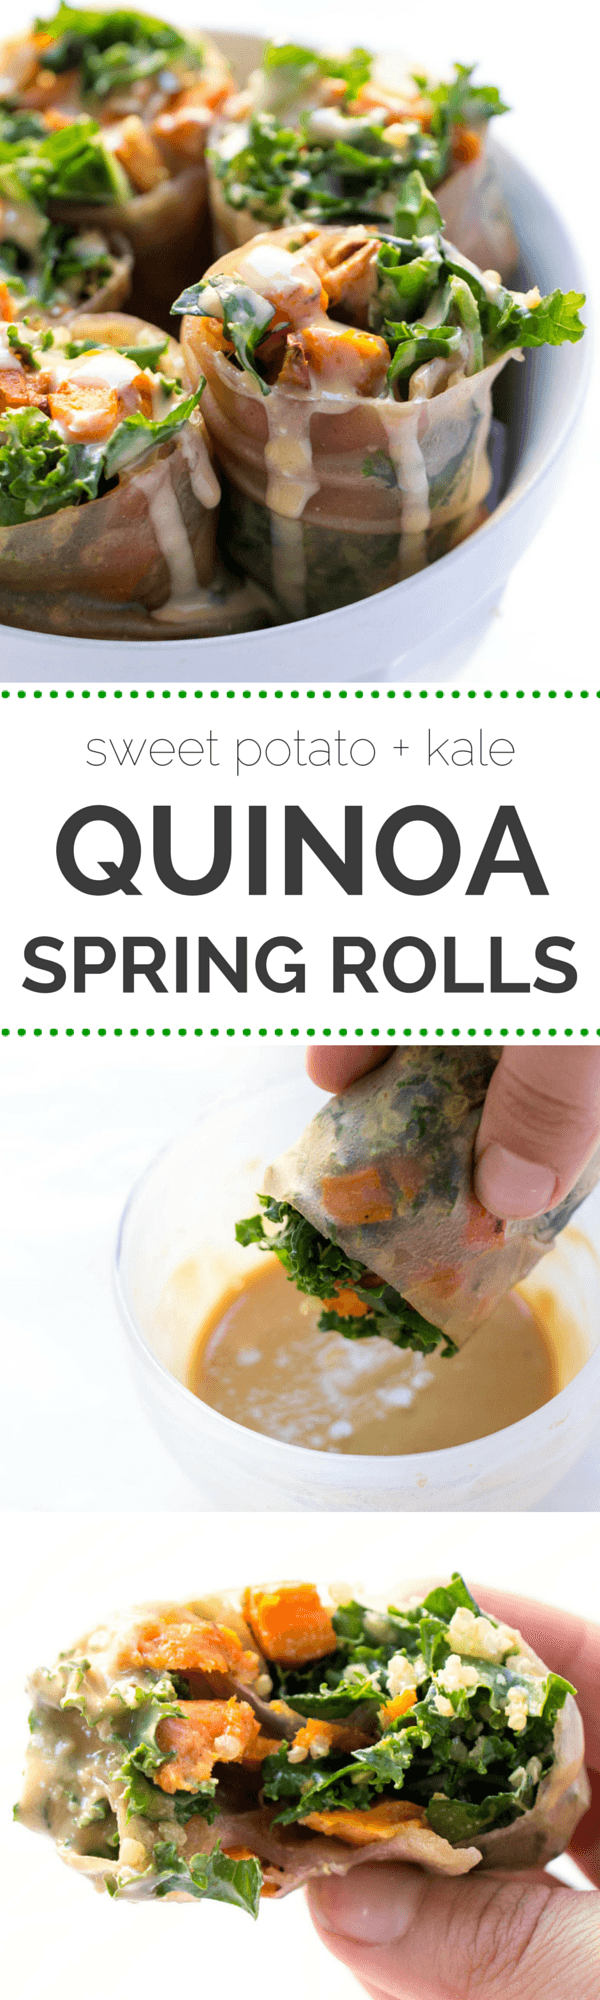 Sweet Potato + Kale Quinoa Spring Rolls -- a seasonal spin on a delicious gluten-free meal (they make great leftovers too!) -- VEGAN + GF